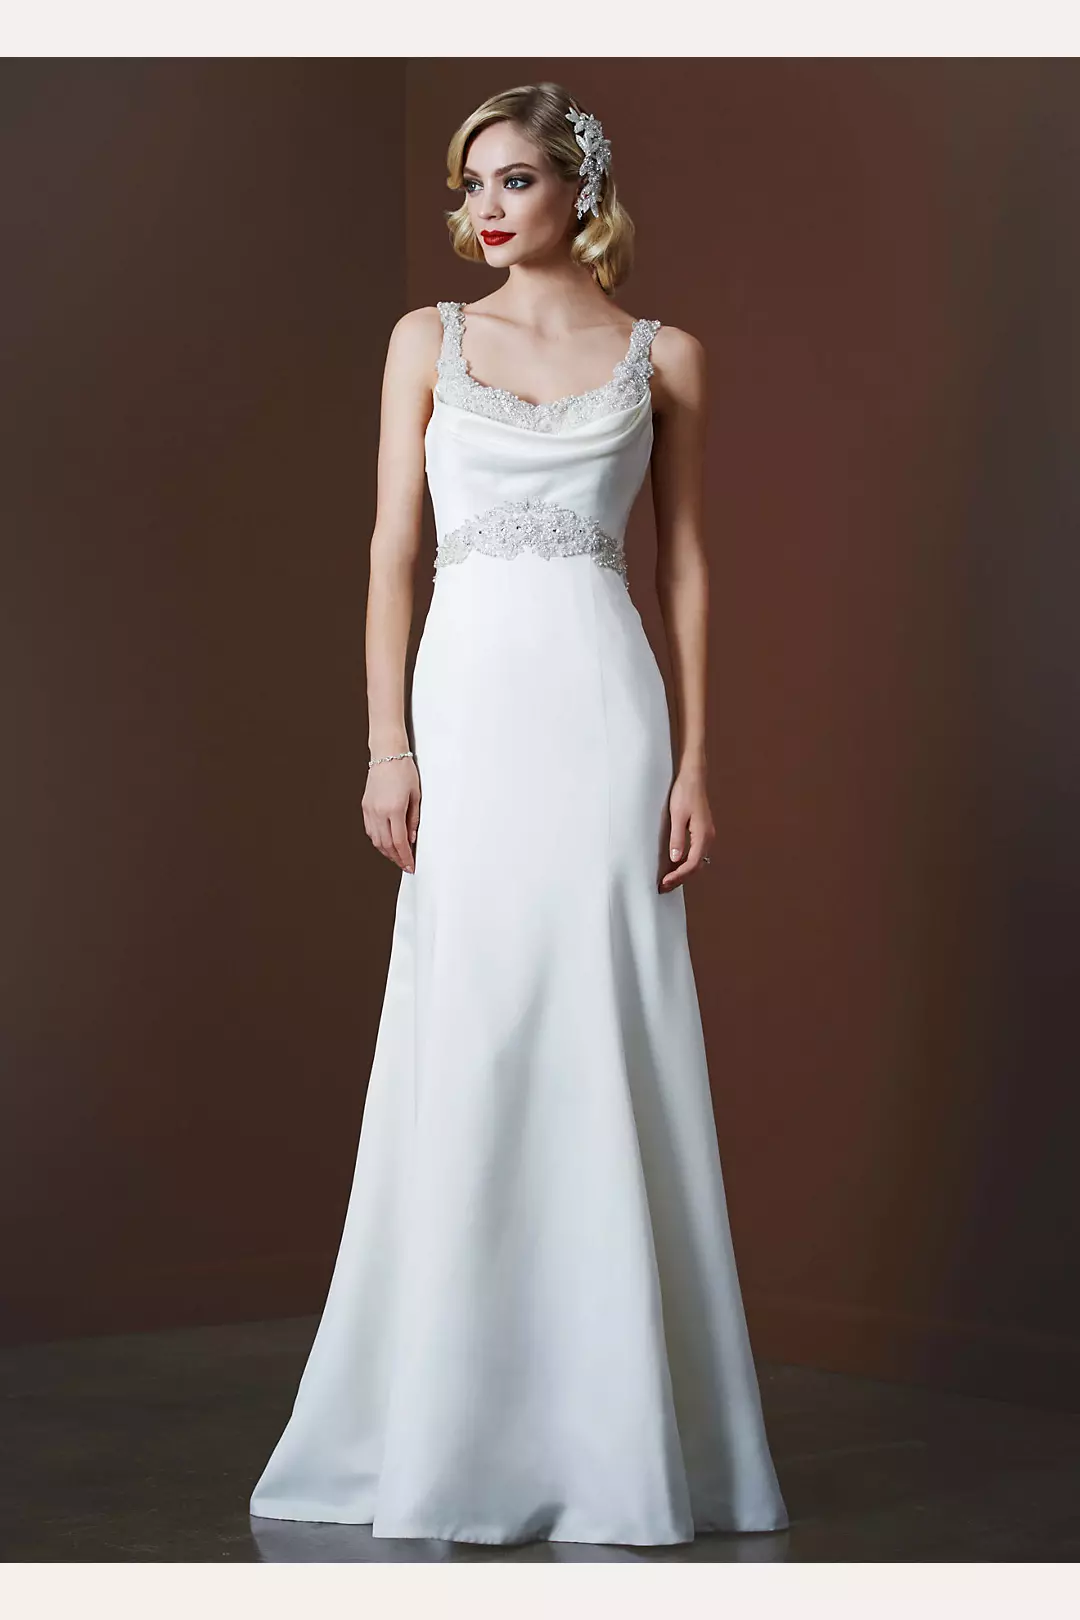 Petite Gown with Beaded Waist and Illusion Back Image